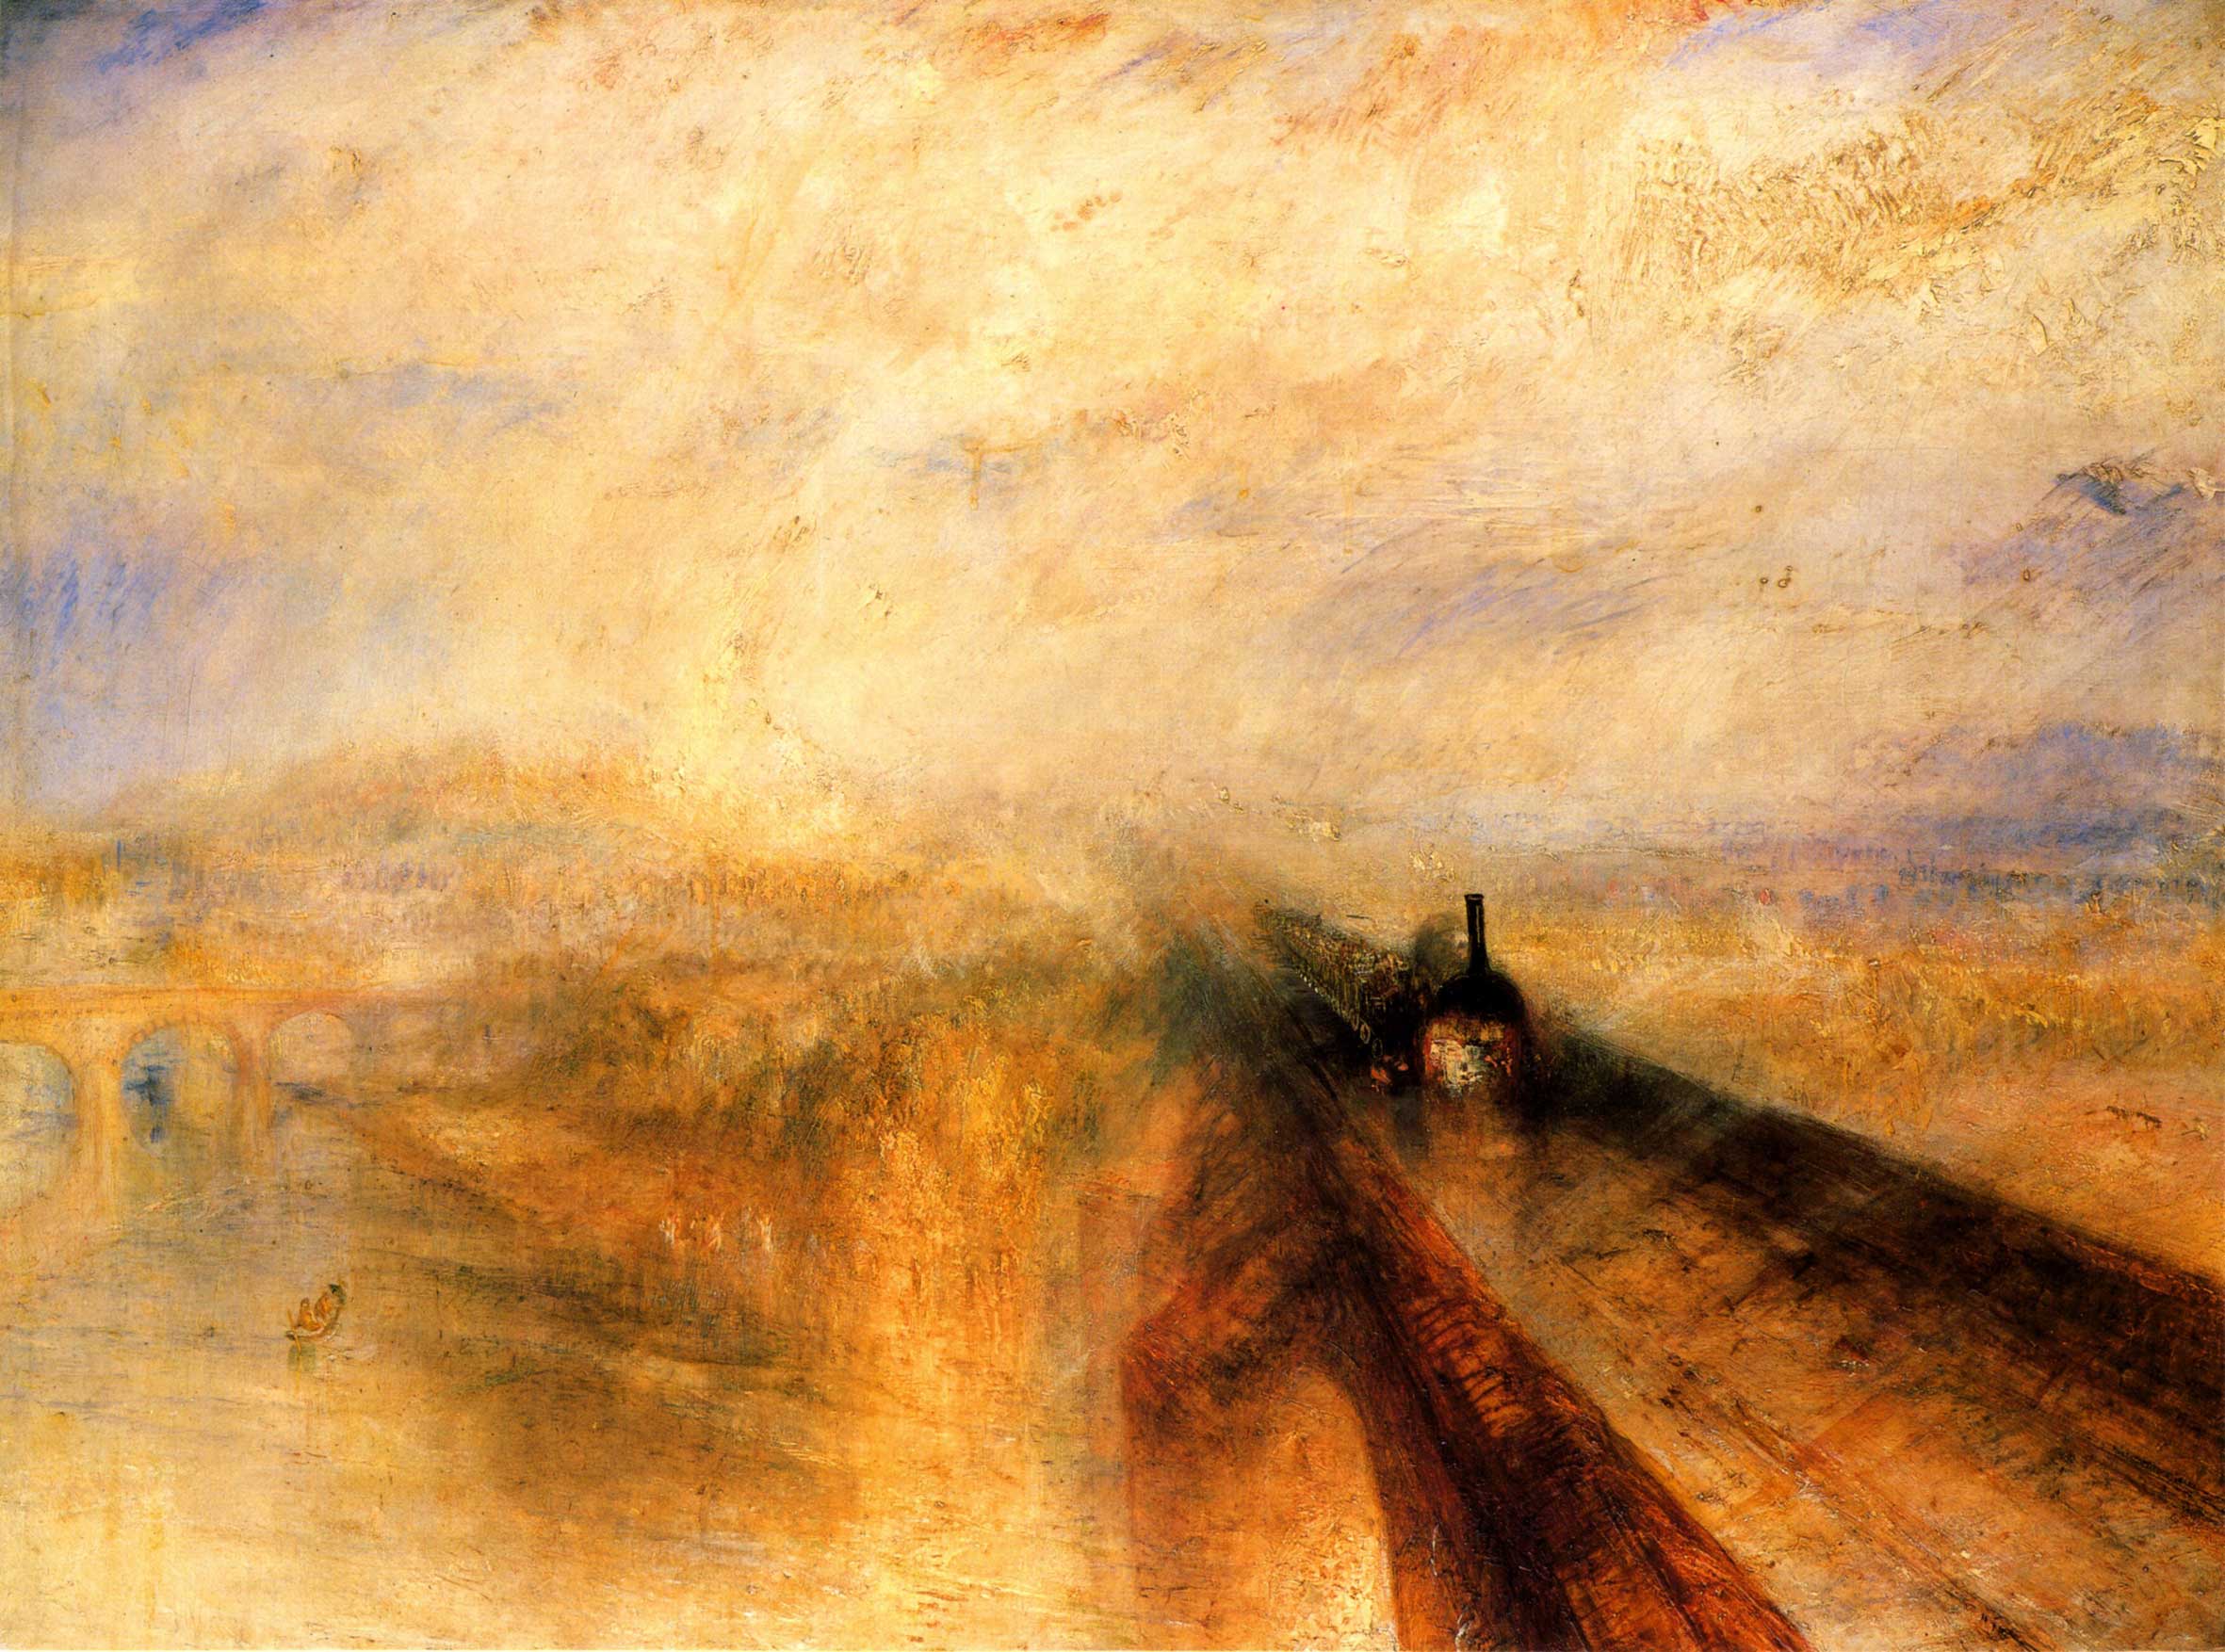 Figure 2: J. M. W. Turner, Rain, Steam and Speed – The Great Western Railway (1844, oil on canvas.) London, National Gallery. Image in Public Domain.